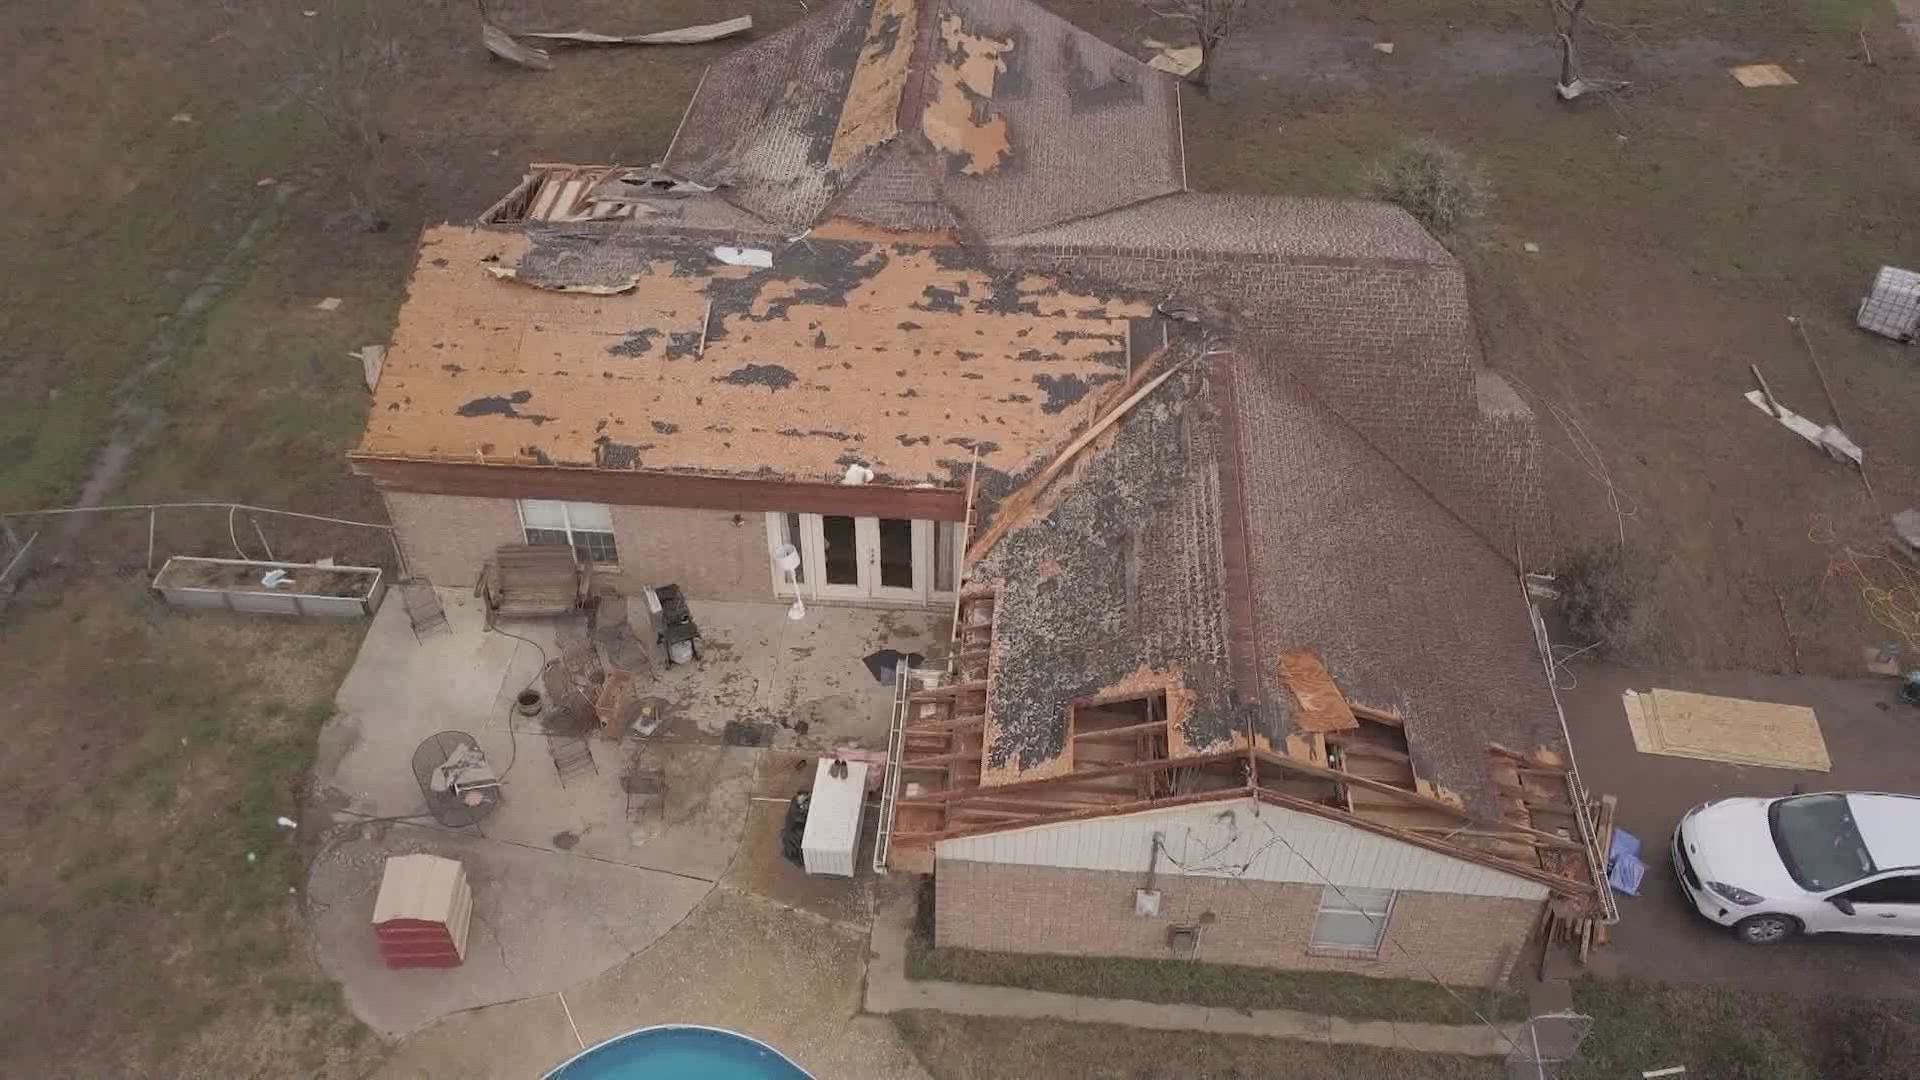 The tornado that struck Blue Ridge in rural Collin County Tuesday morning damaged or destroyed every building on the properties shared by the Reising-Diehl families.